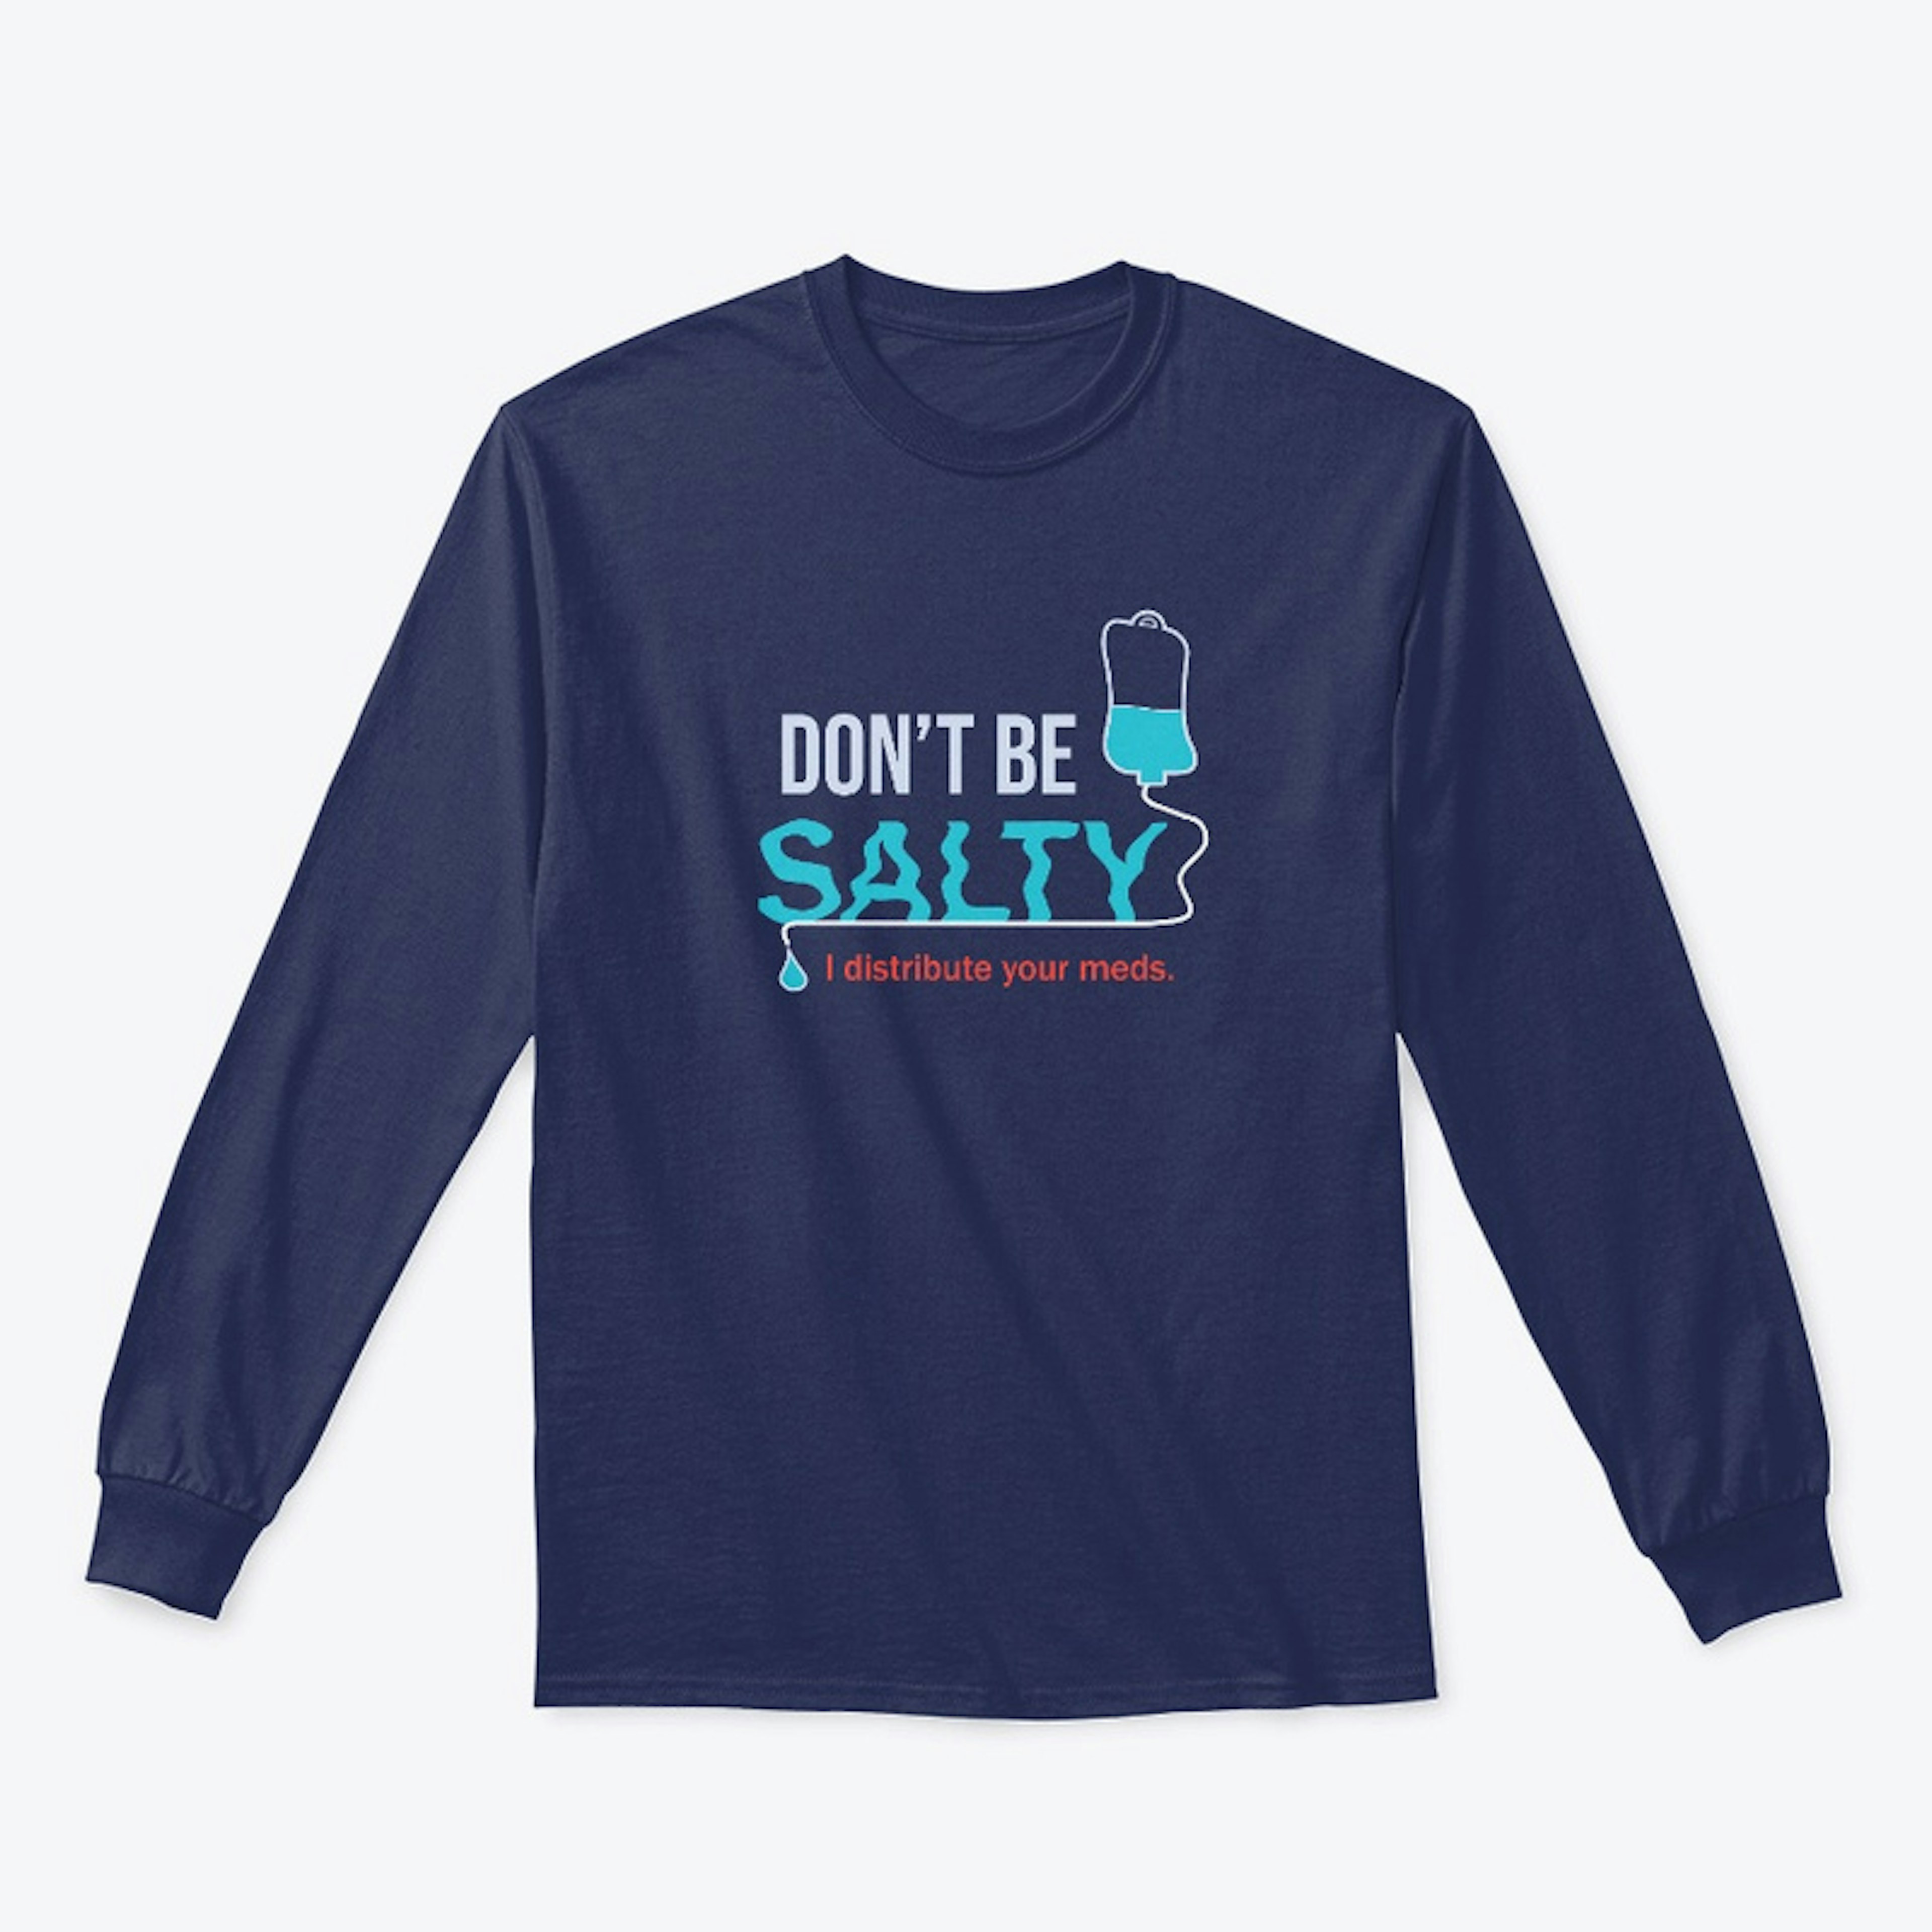 Don't Be Salty (Saline) 